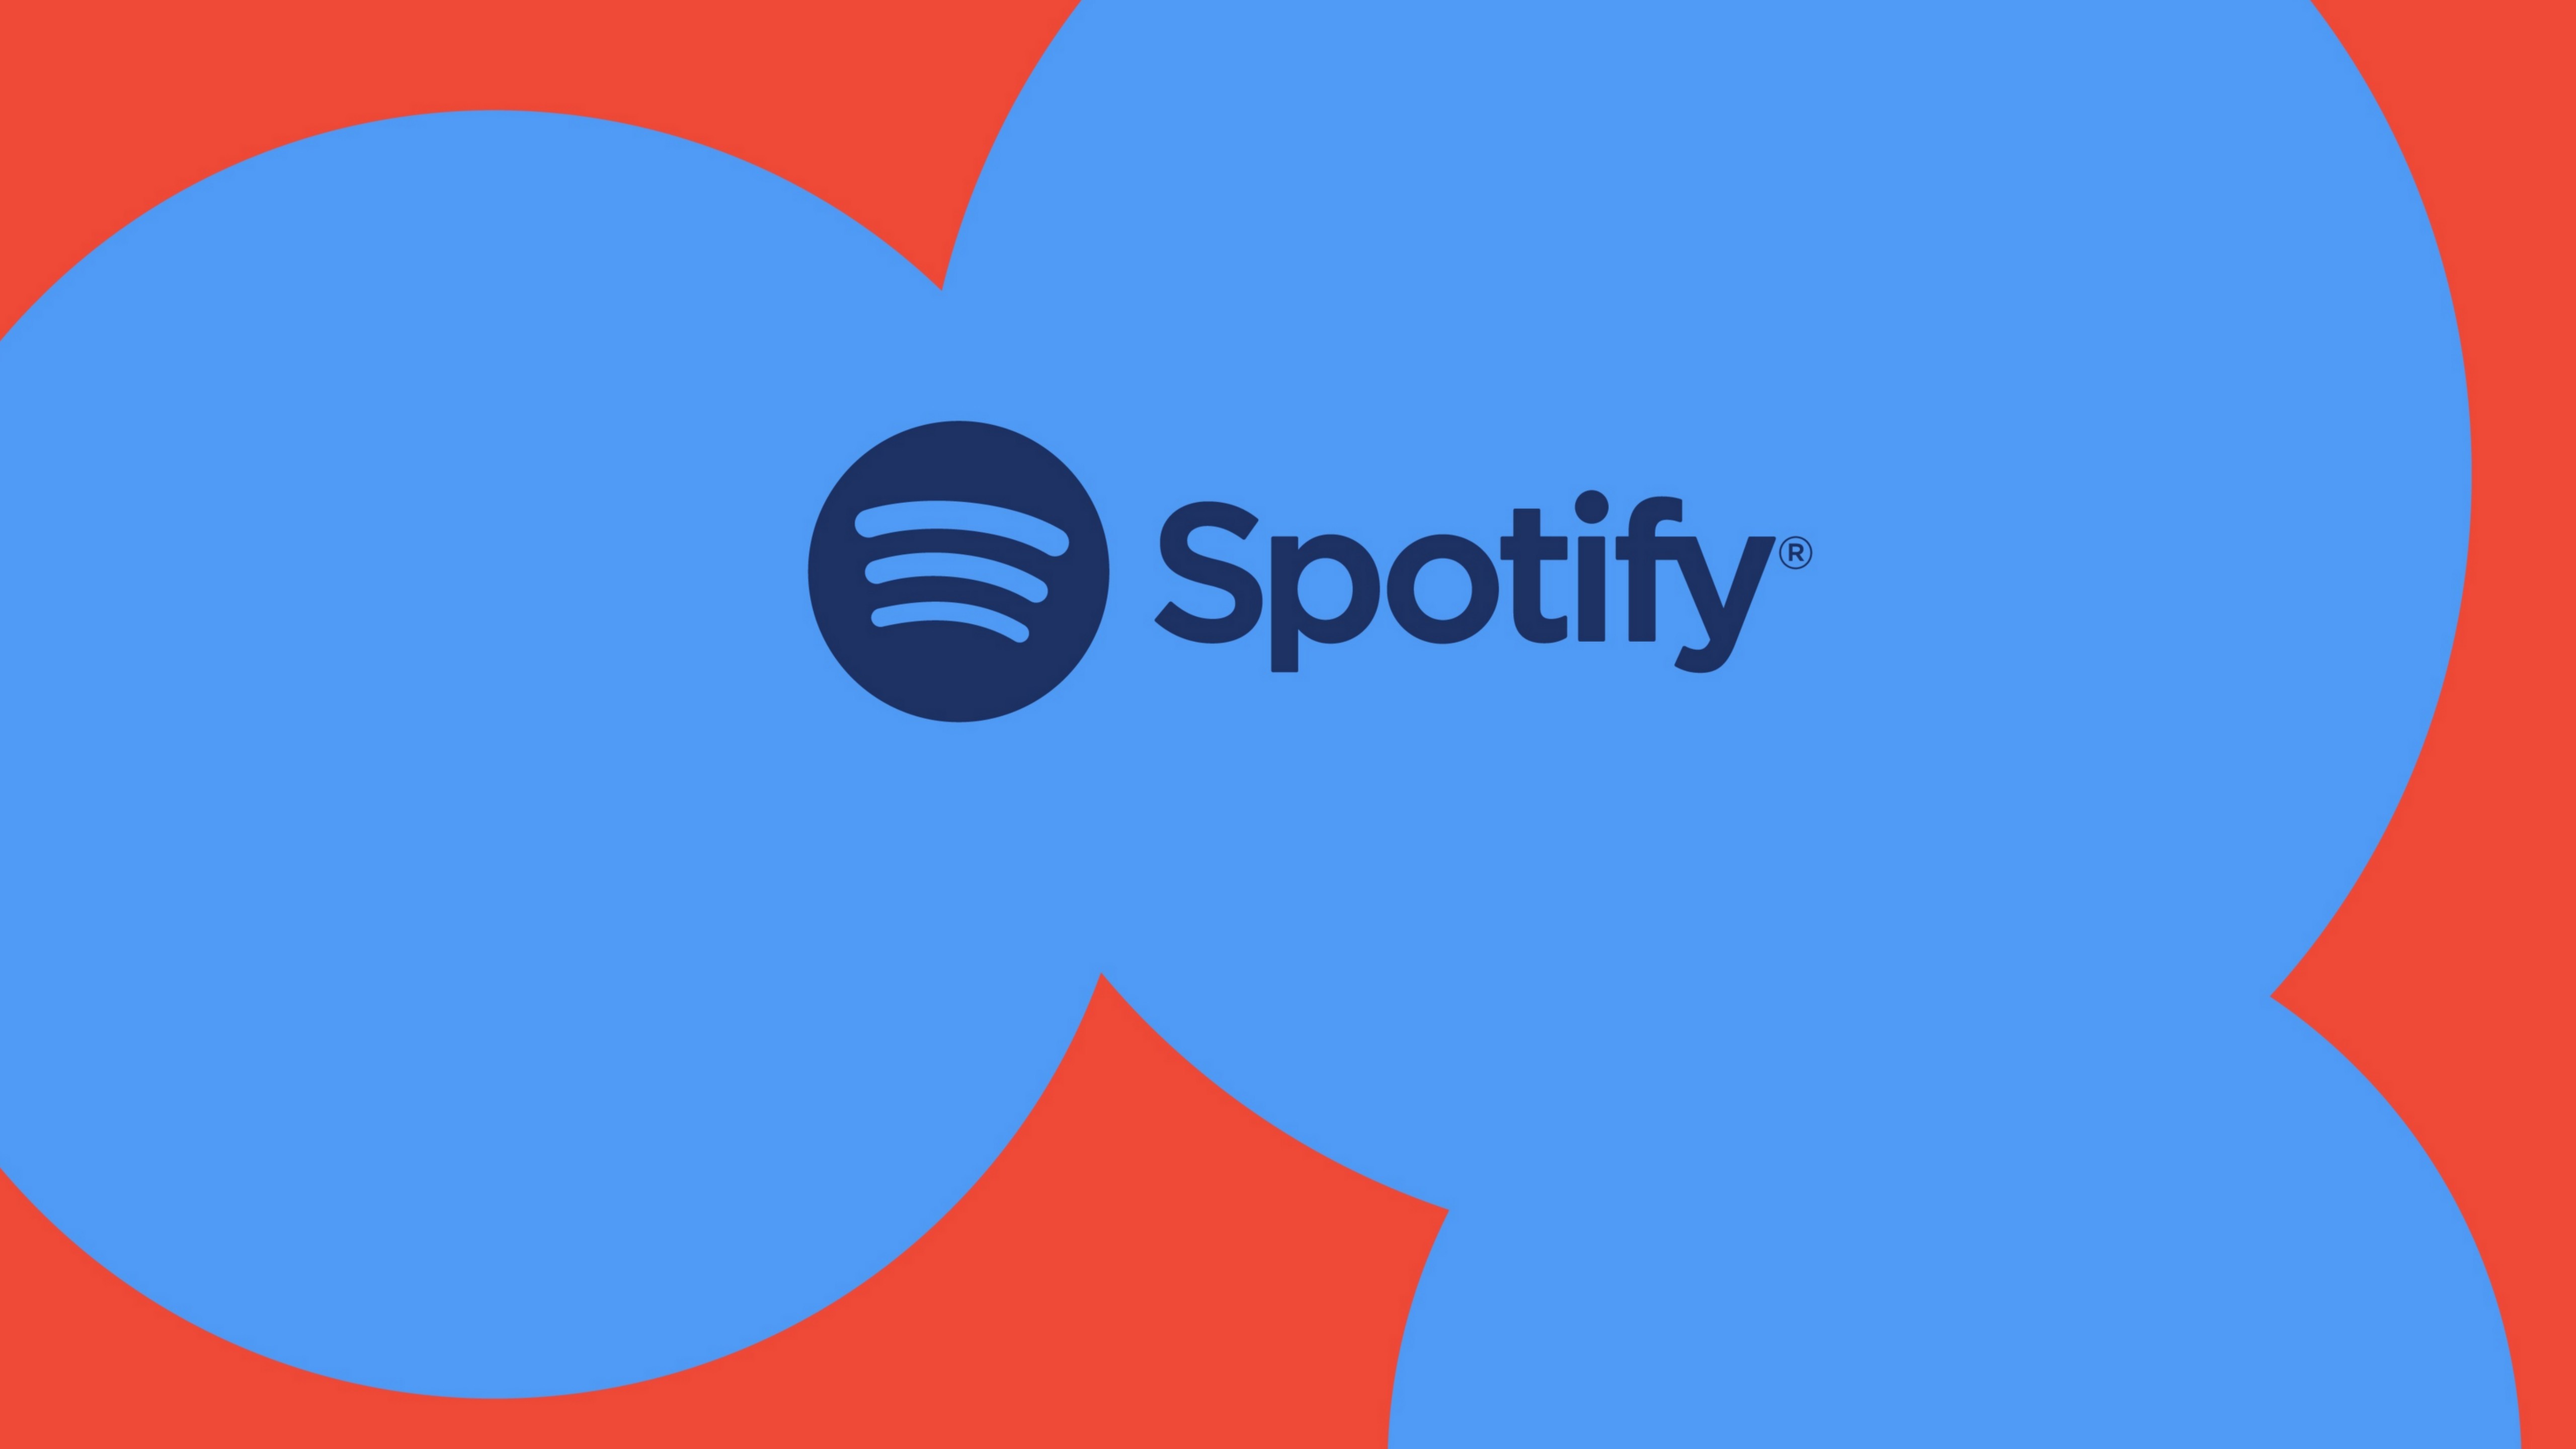 Spotify logo in blue and red